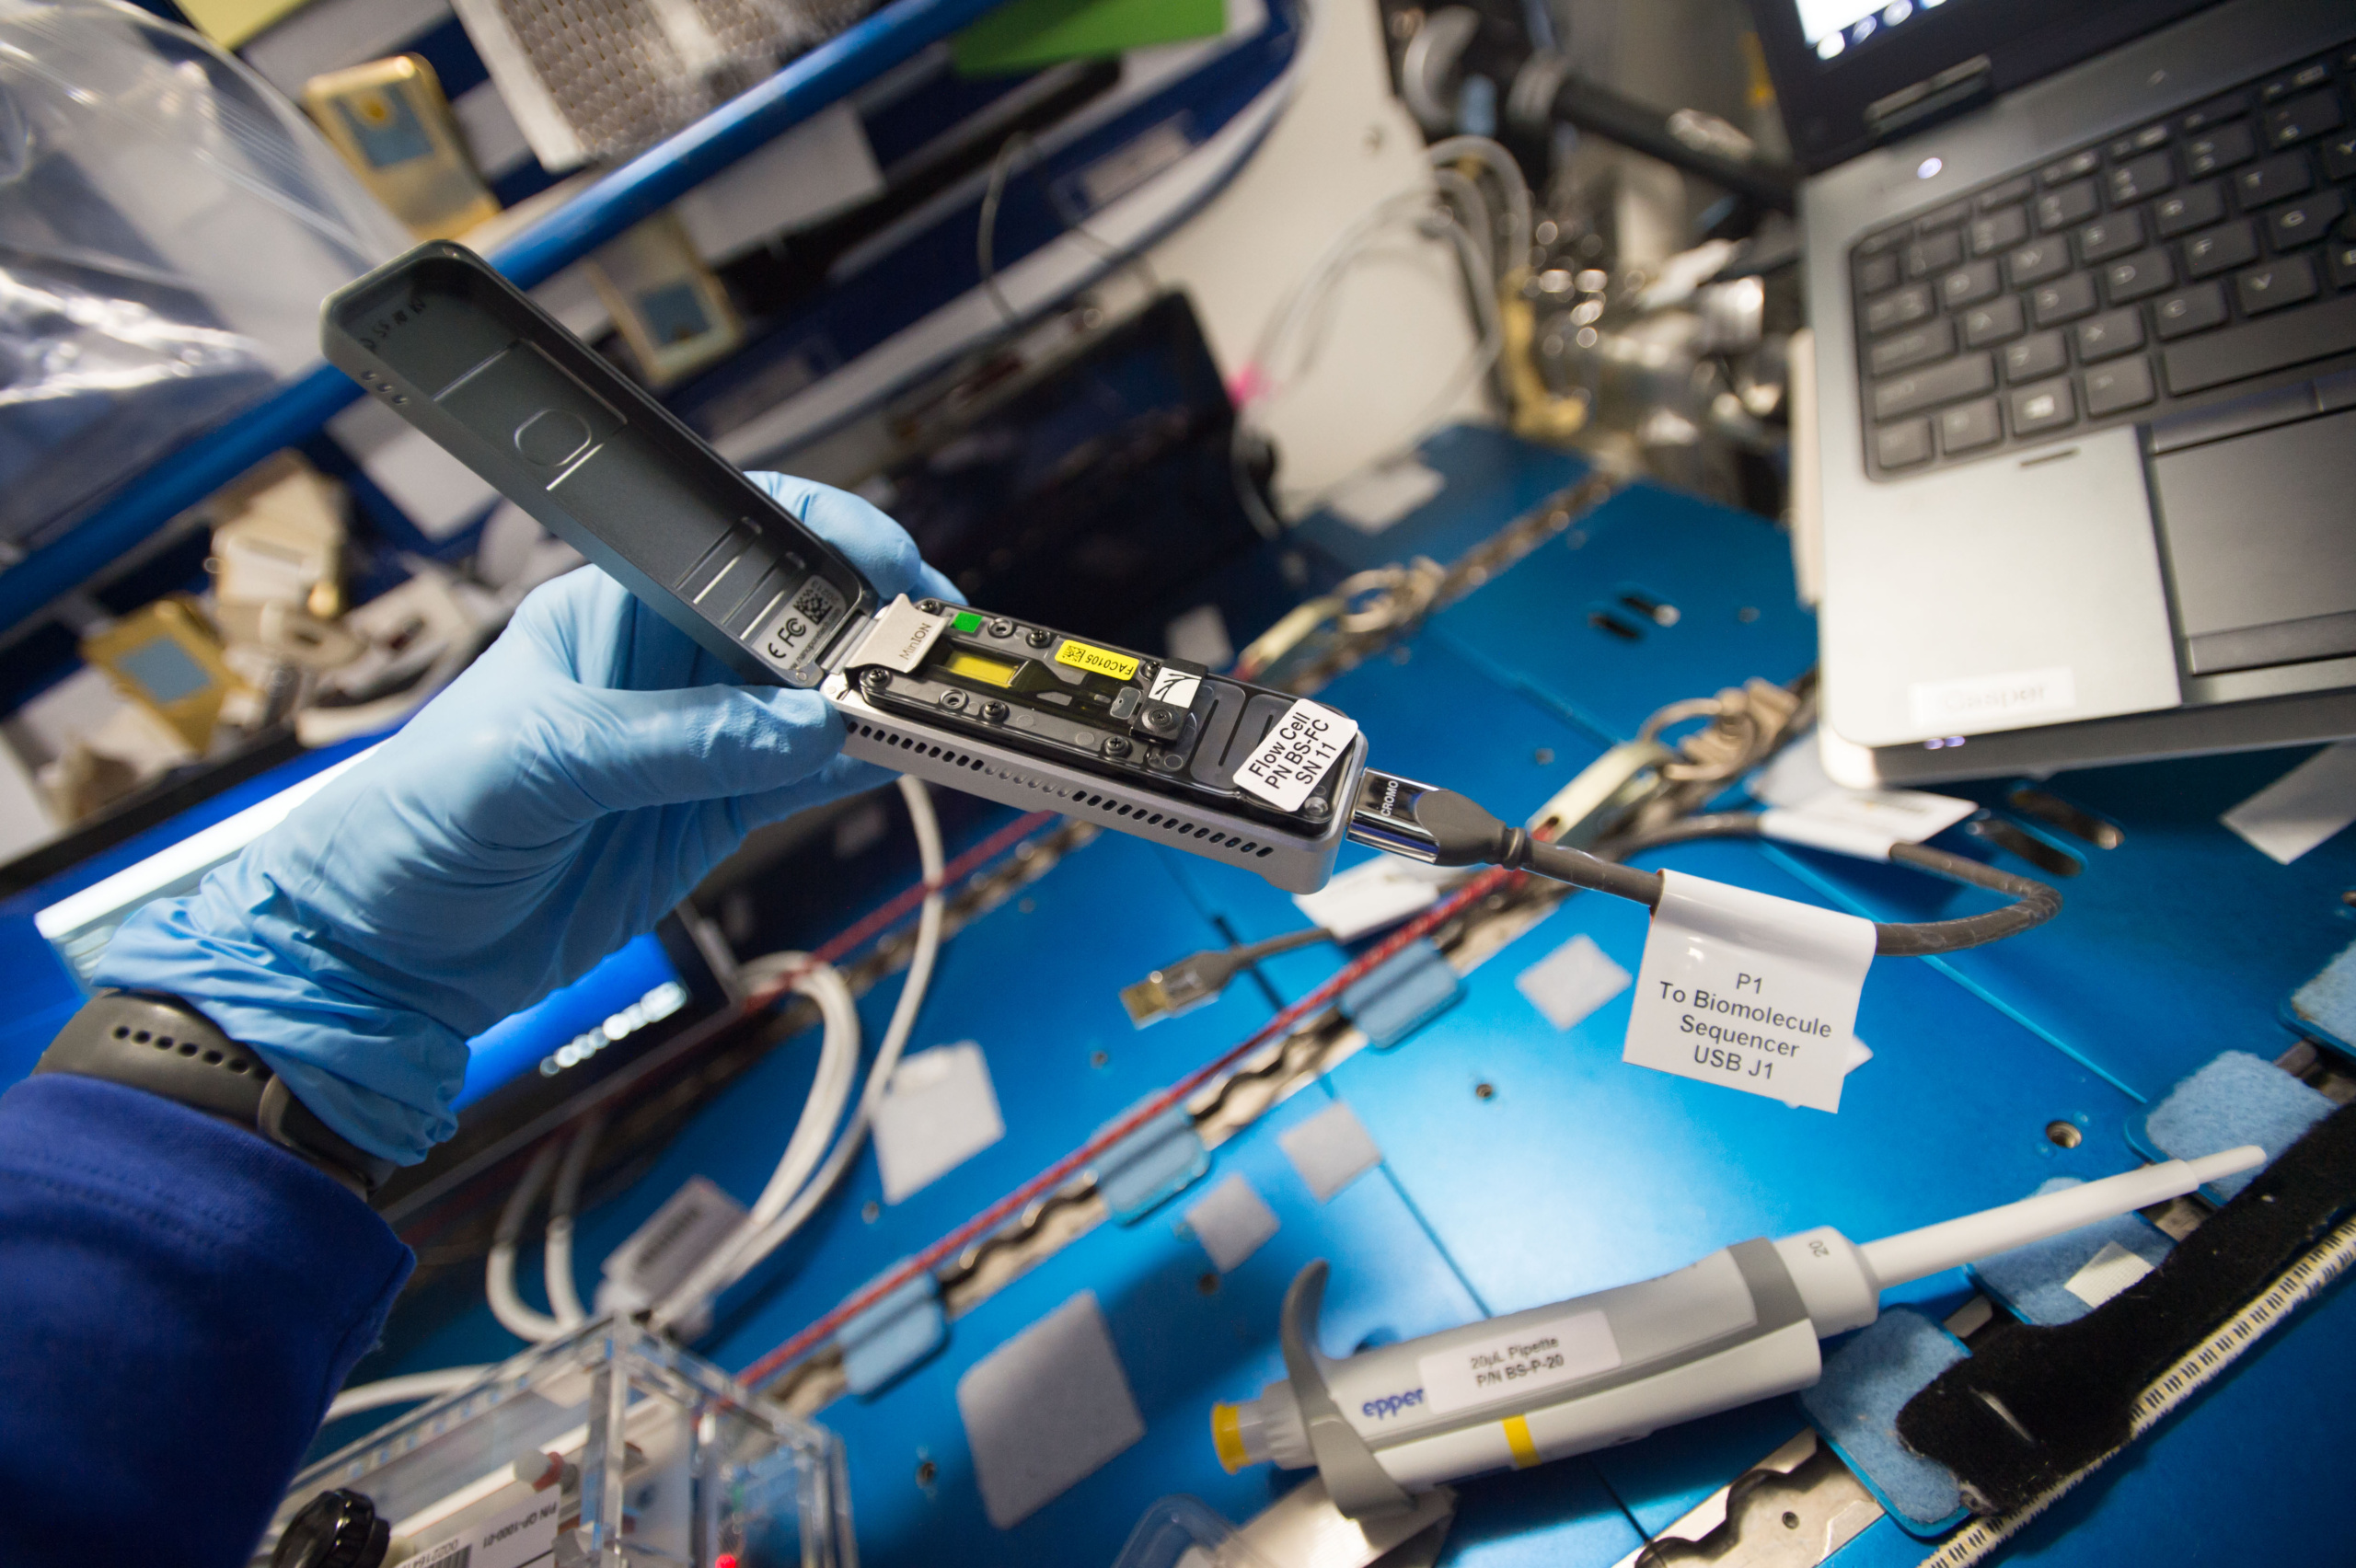 SPACE-H Accelerator seeks businesses addressing health issues in outer space